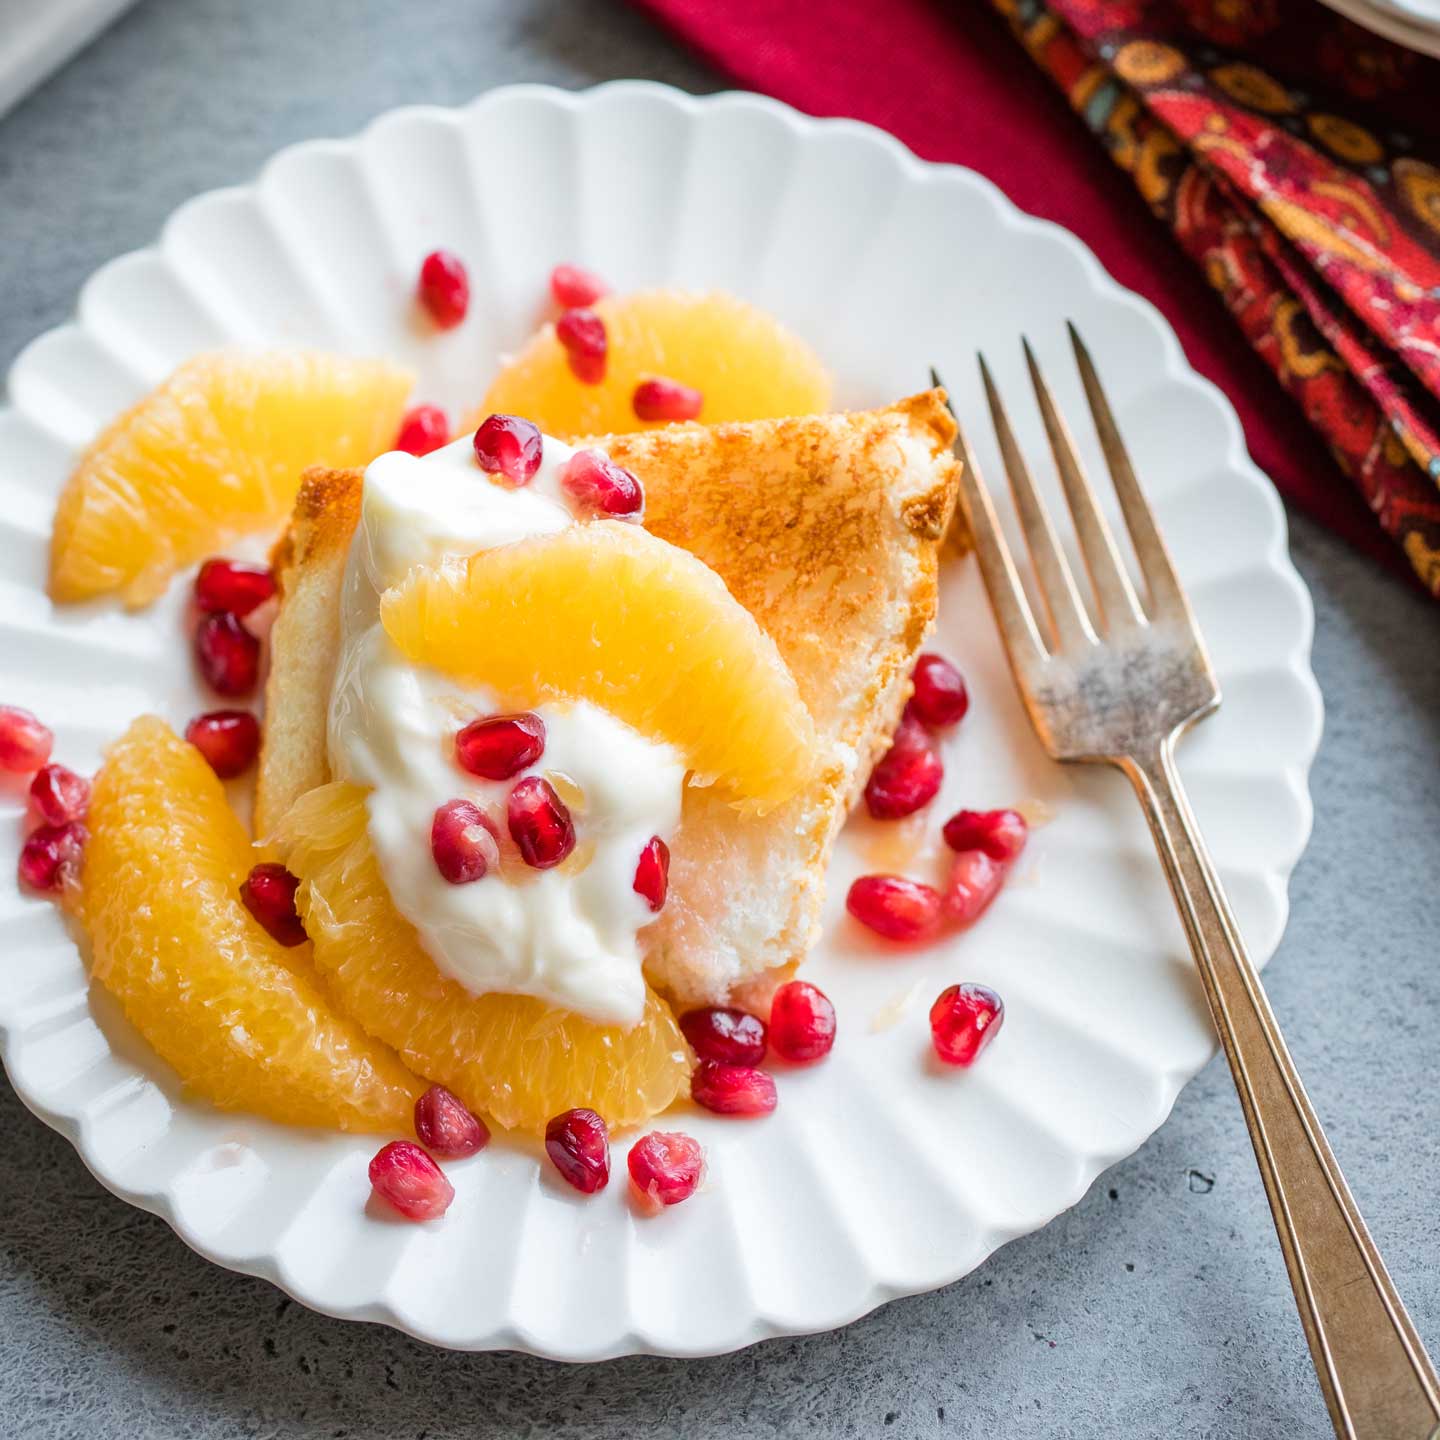 one serving of this dessert, served on a white, scalloped-edge plate with a golden fork